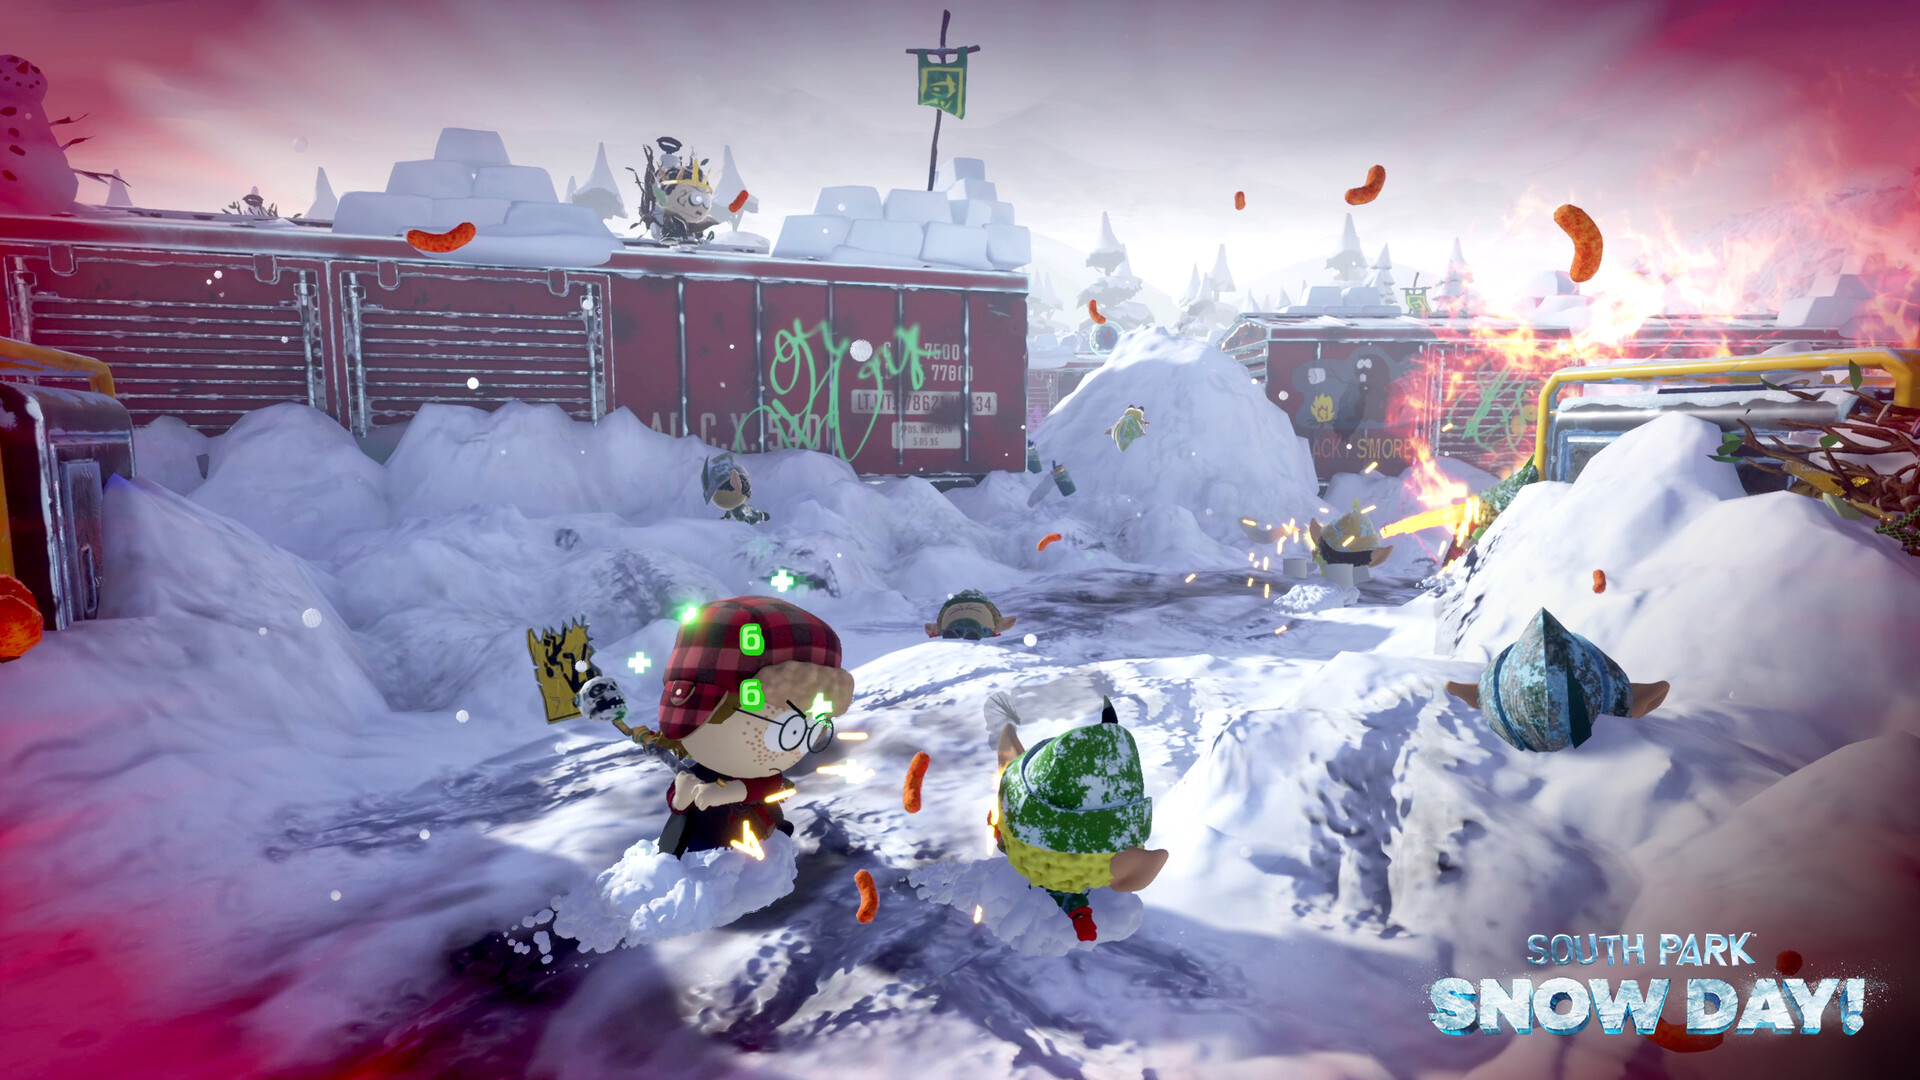 Pre-purchase SOUTH PARK: SNOW DAY! on Steam